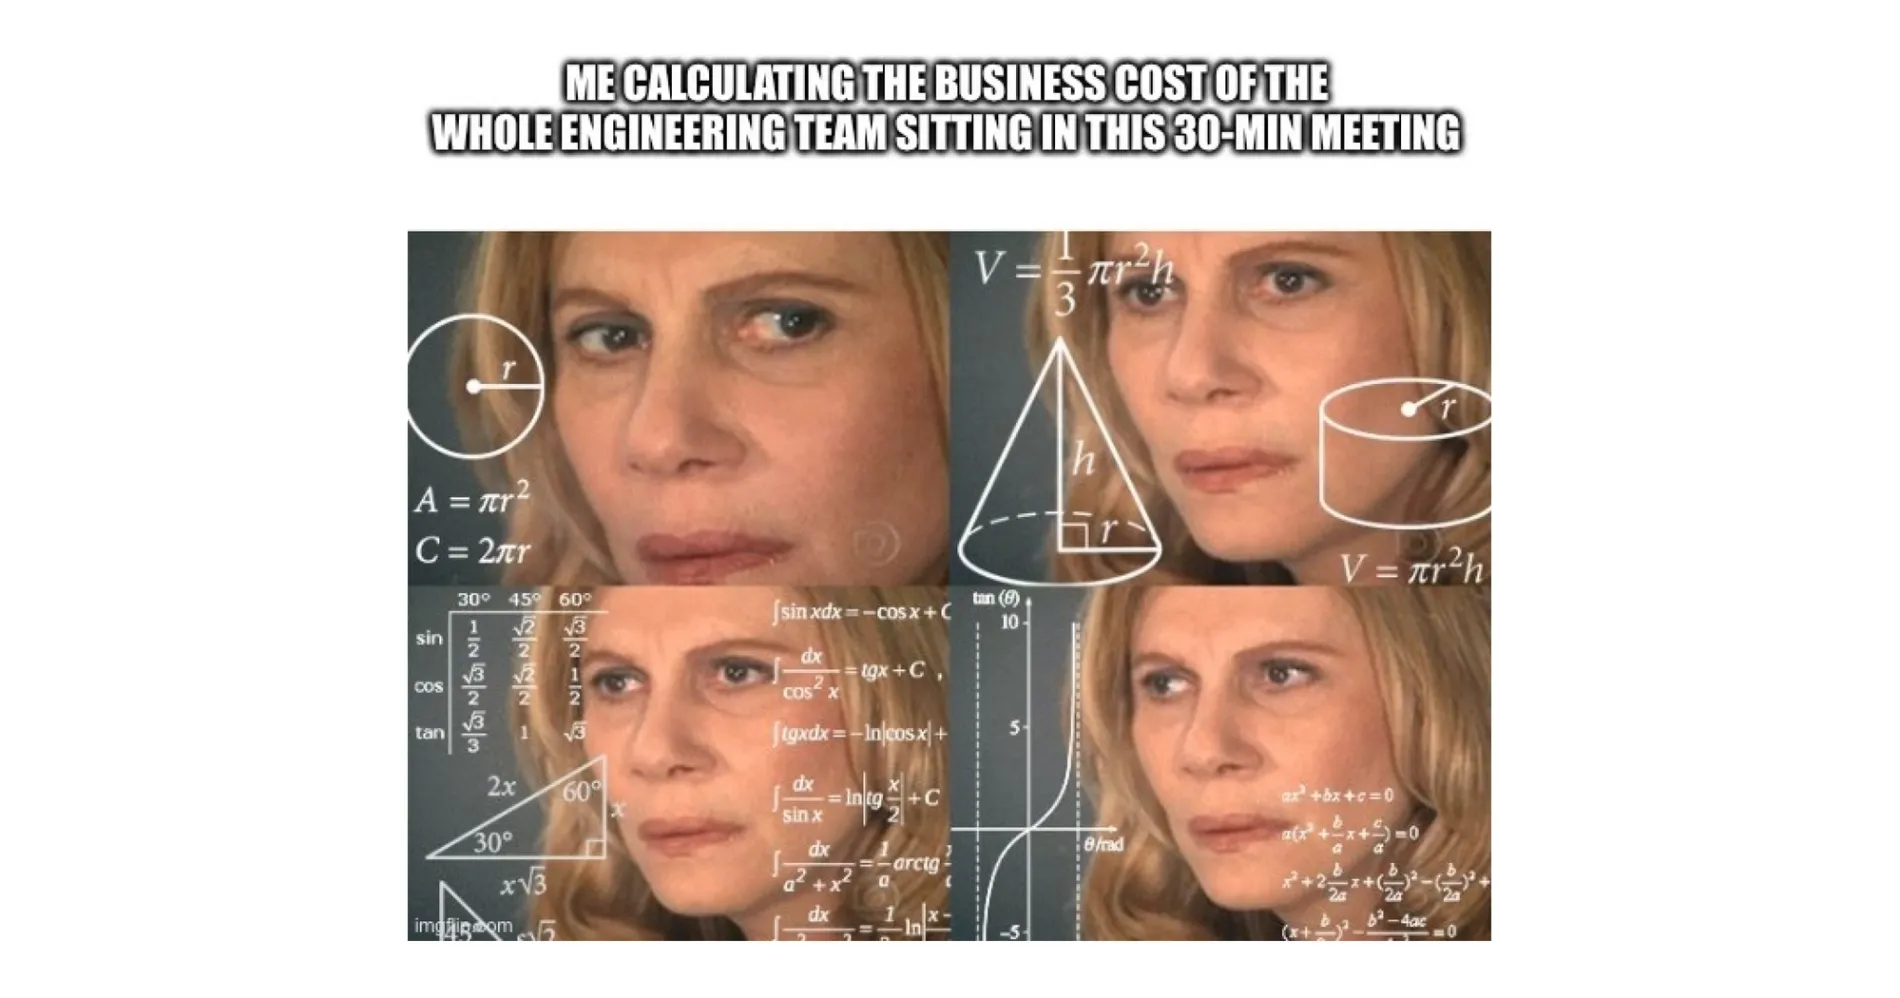 meme about the cost of a meeting being an incrediblly hard math puzzle